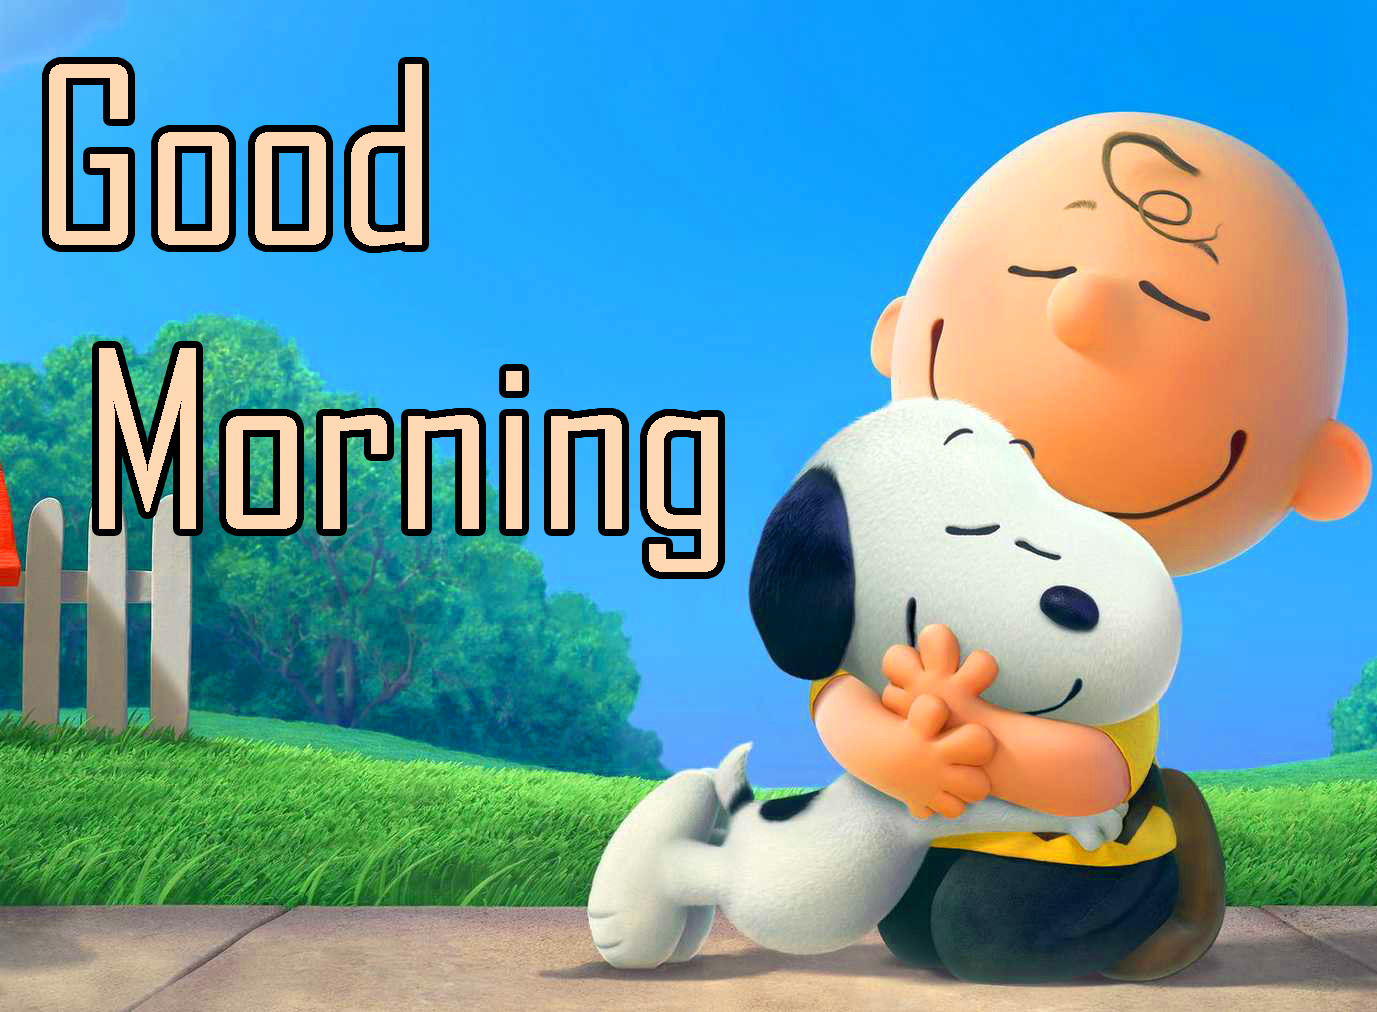 Snoopy Good Morning Wishes Pics Free in HD